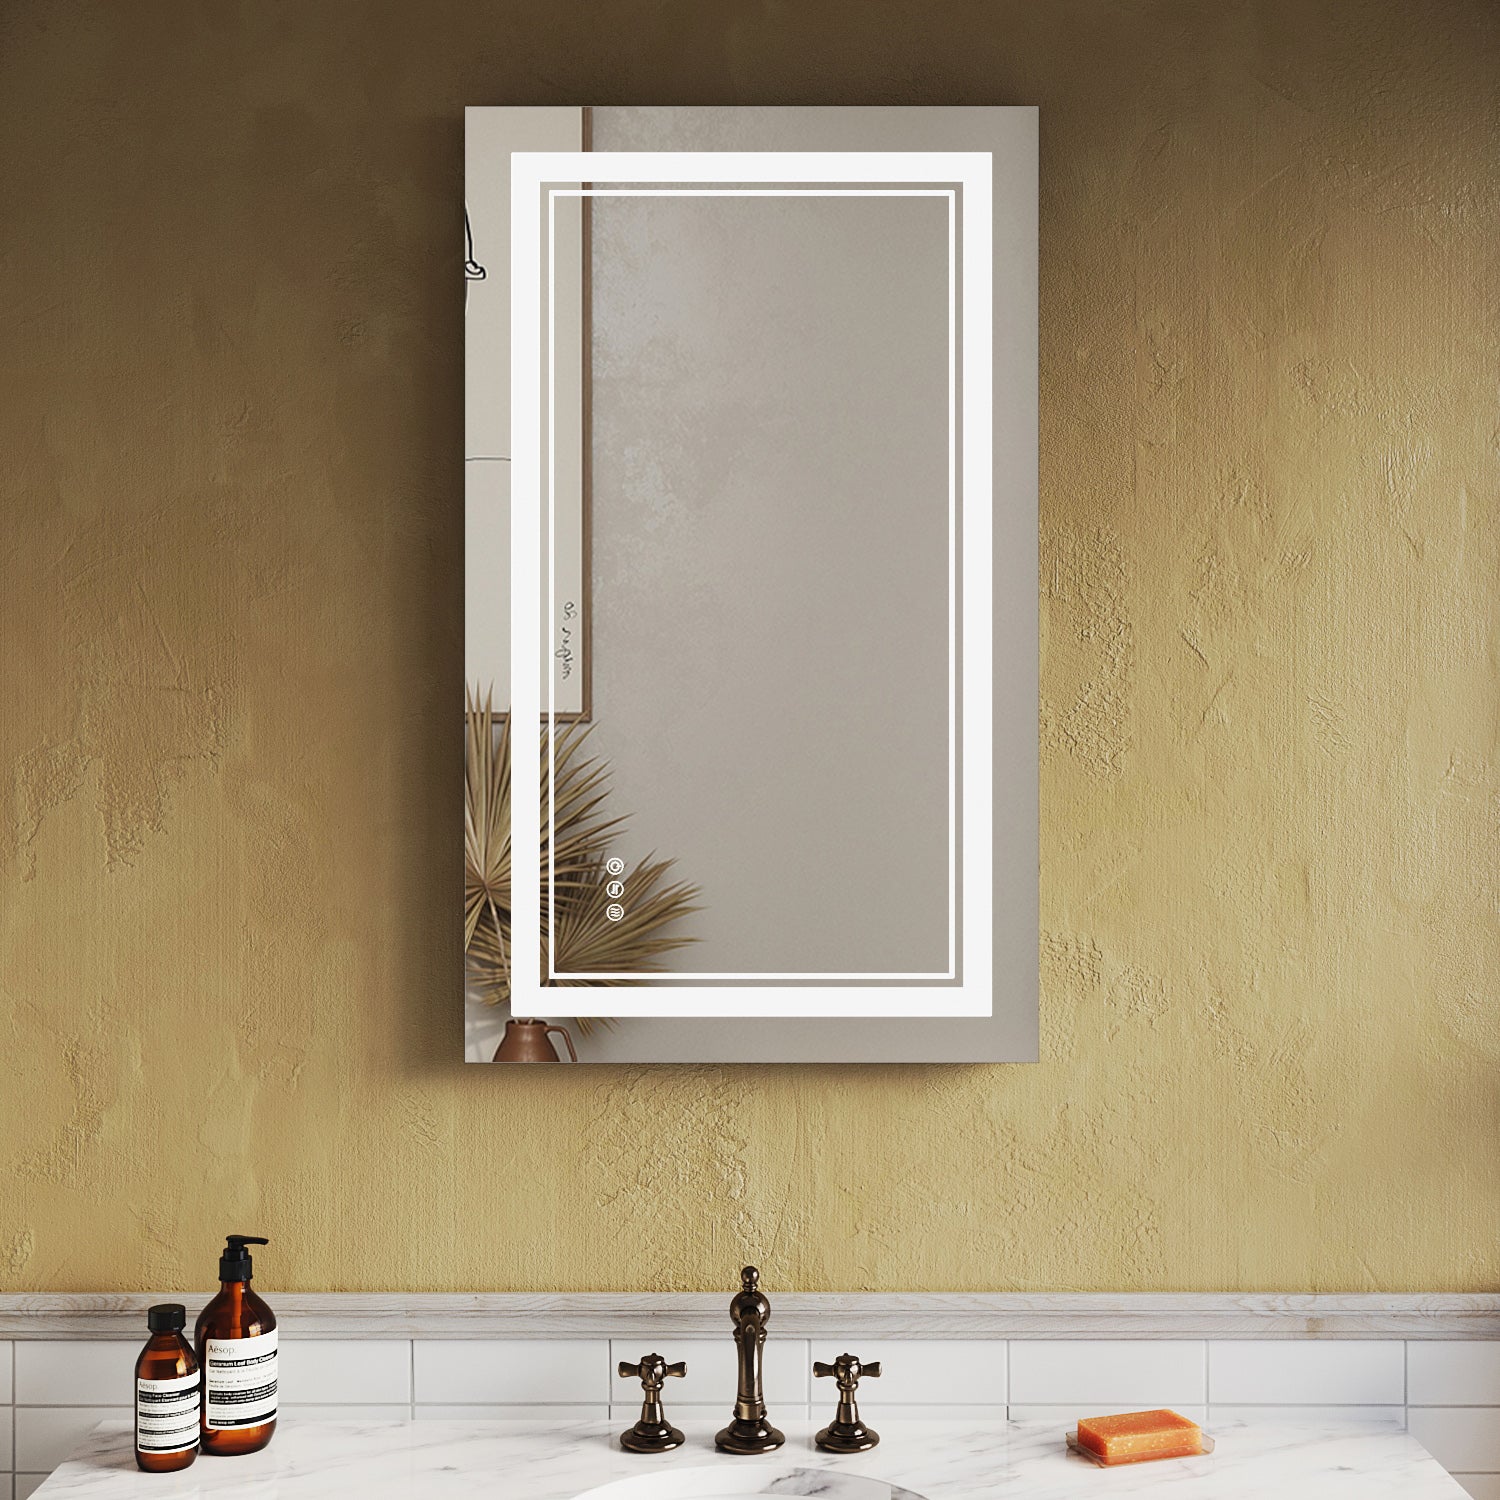 SUNNY SHOWER LED Bathroom MakeUp Mirror 40 x 24 in.丨Anti-Fog and Waterproof丨3 Color Temperature Setting丨Memory Function - SUNNY SHOWER